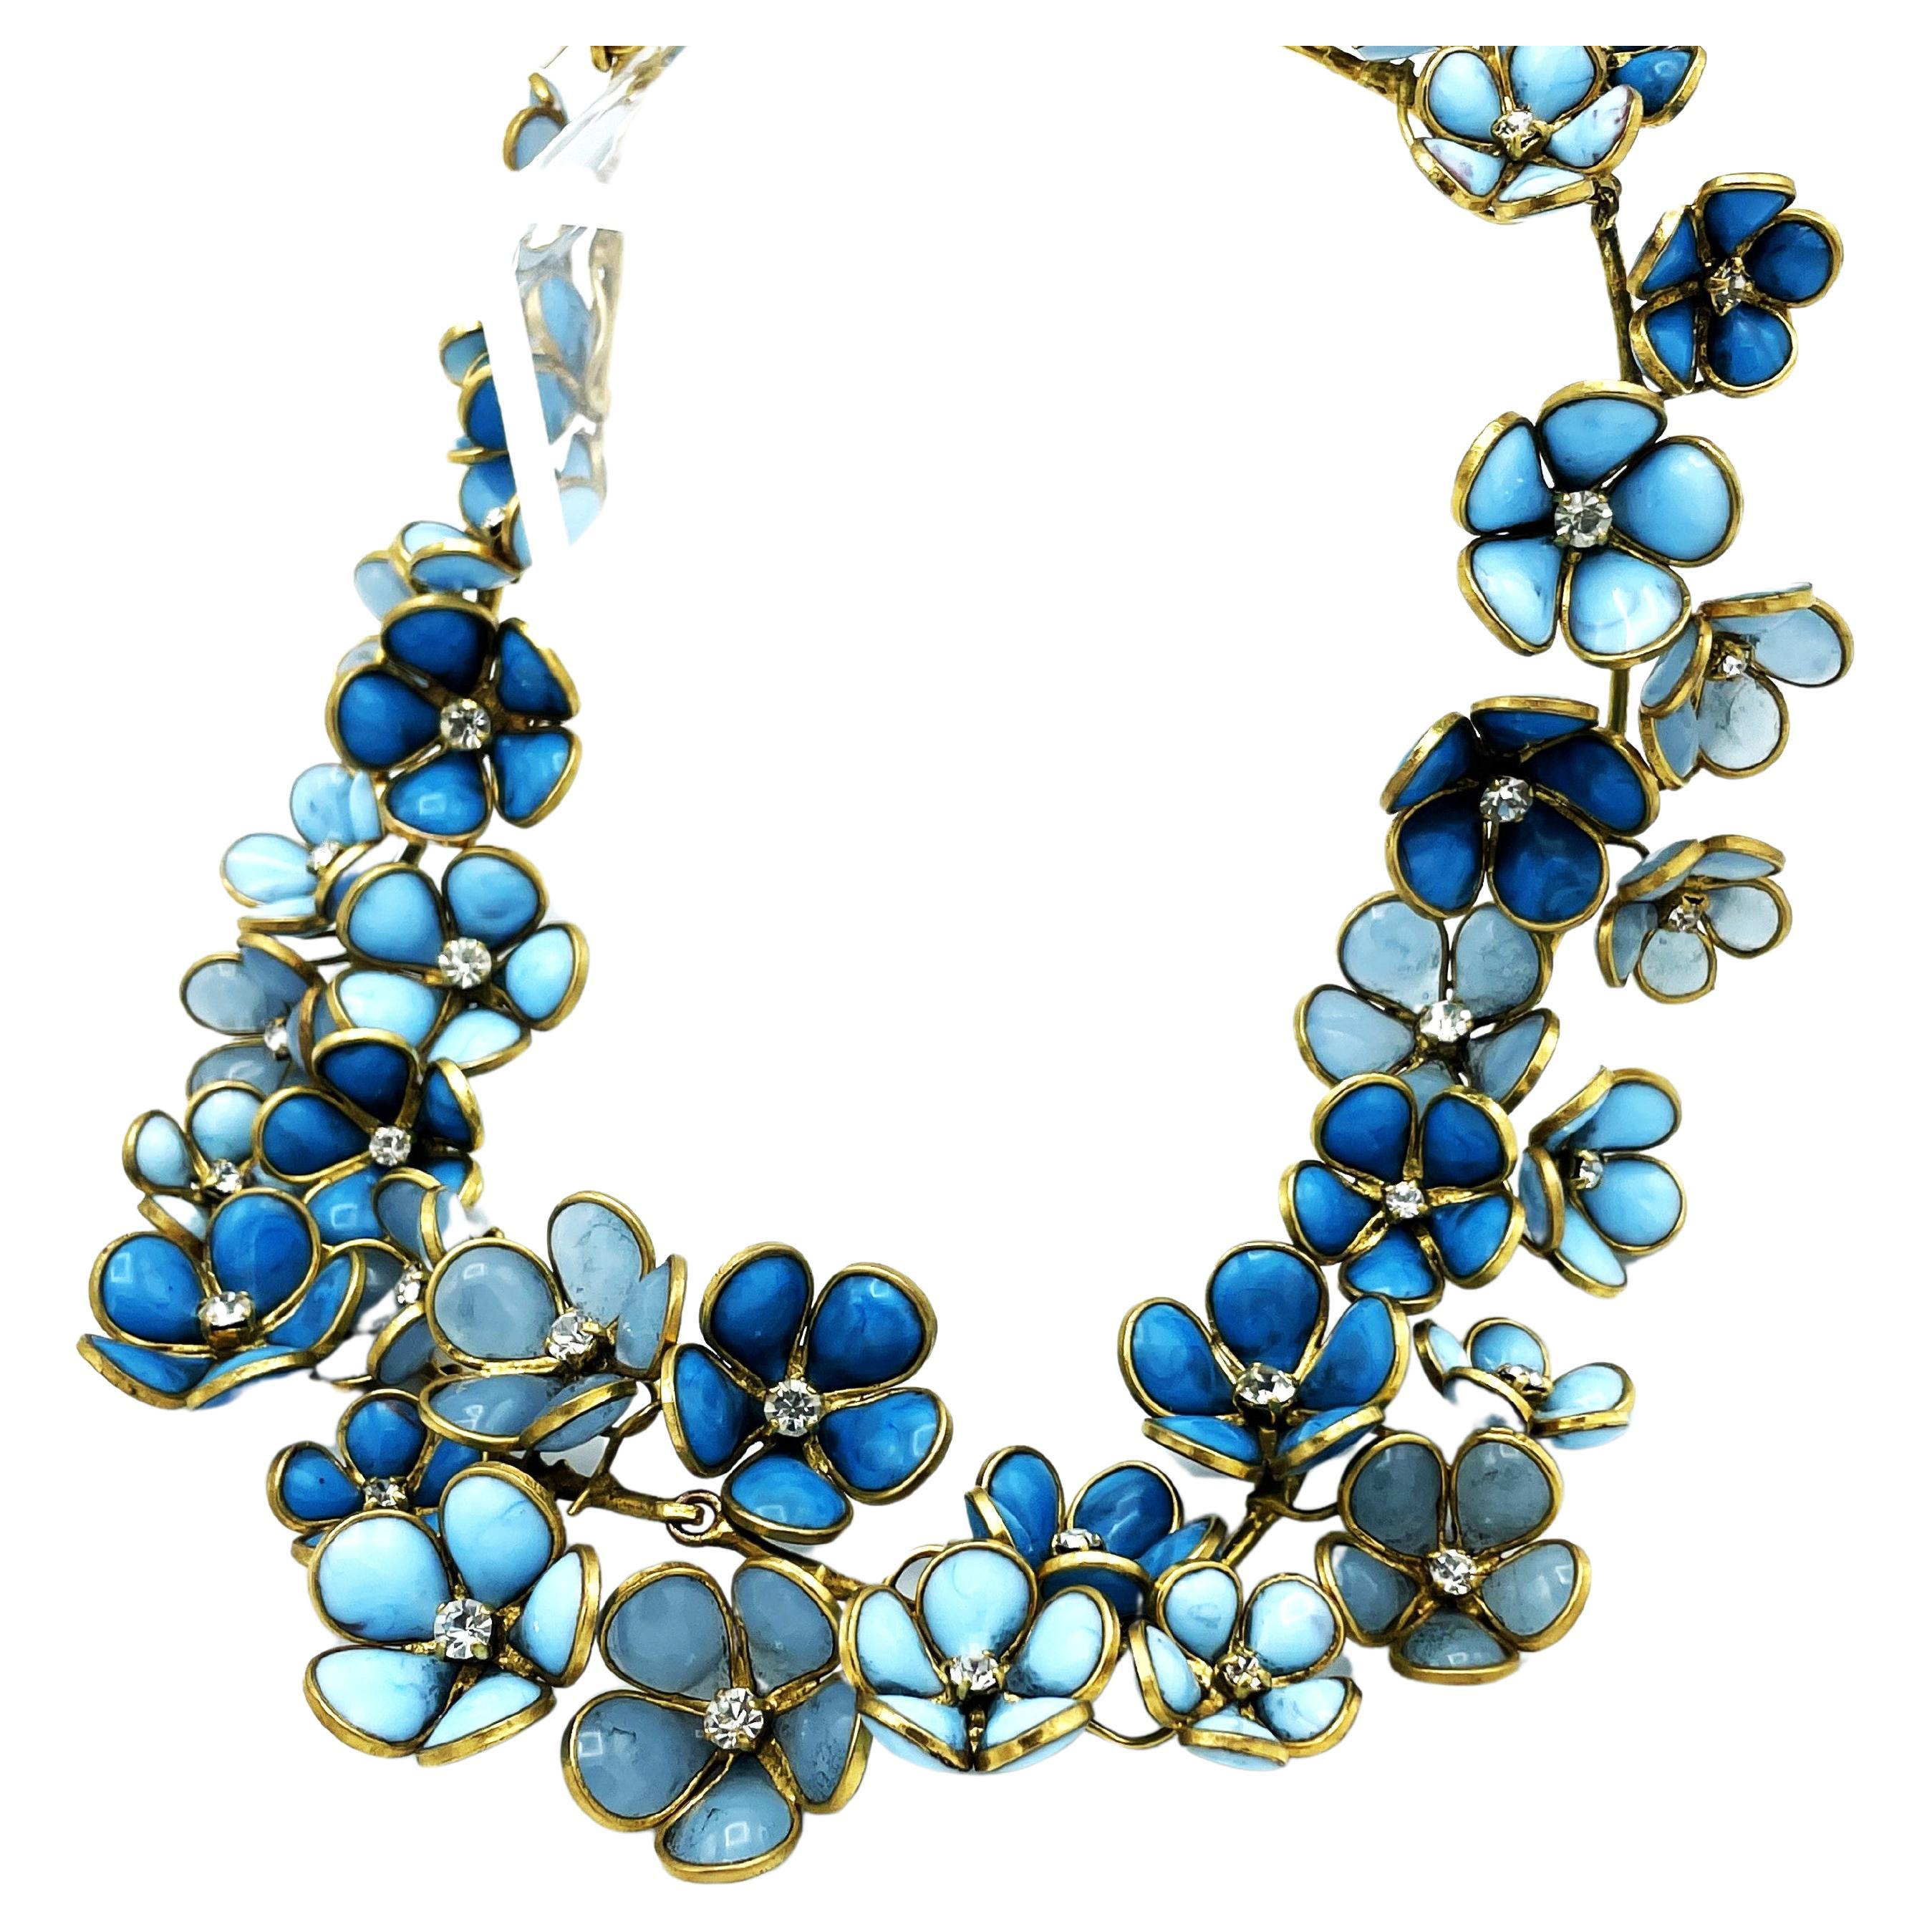 Necklace of many blue glass flowers from Gripoix in the style of Chanel For Sale